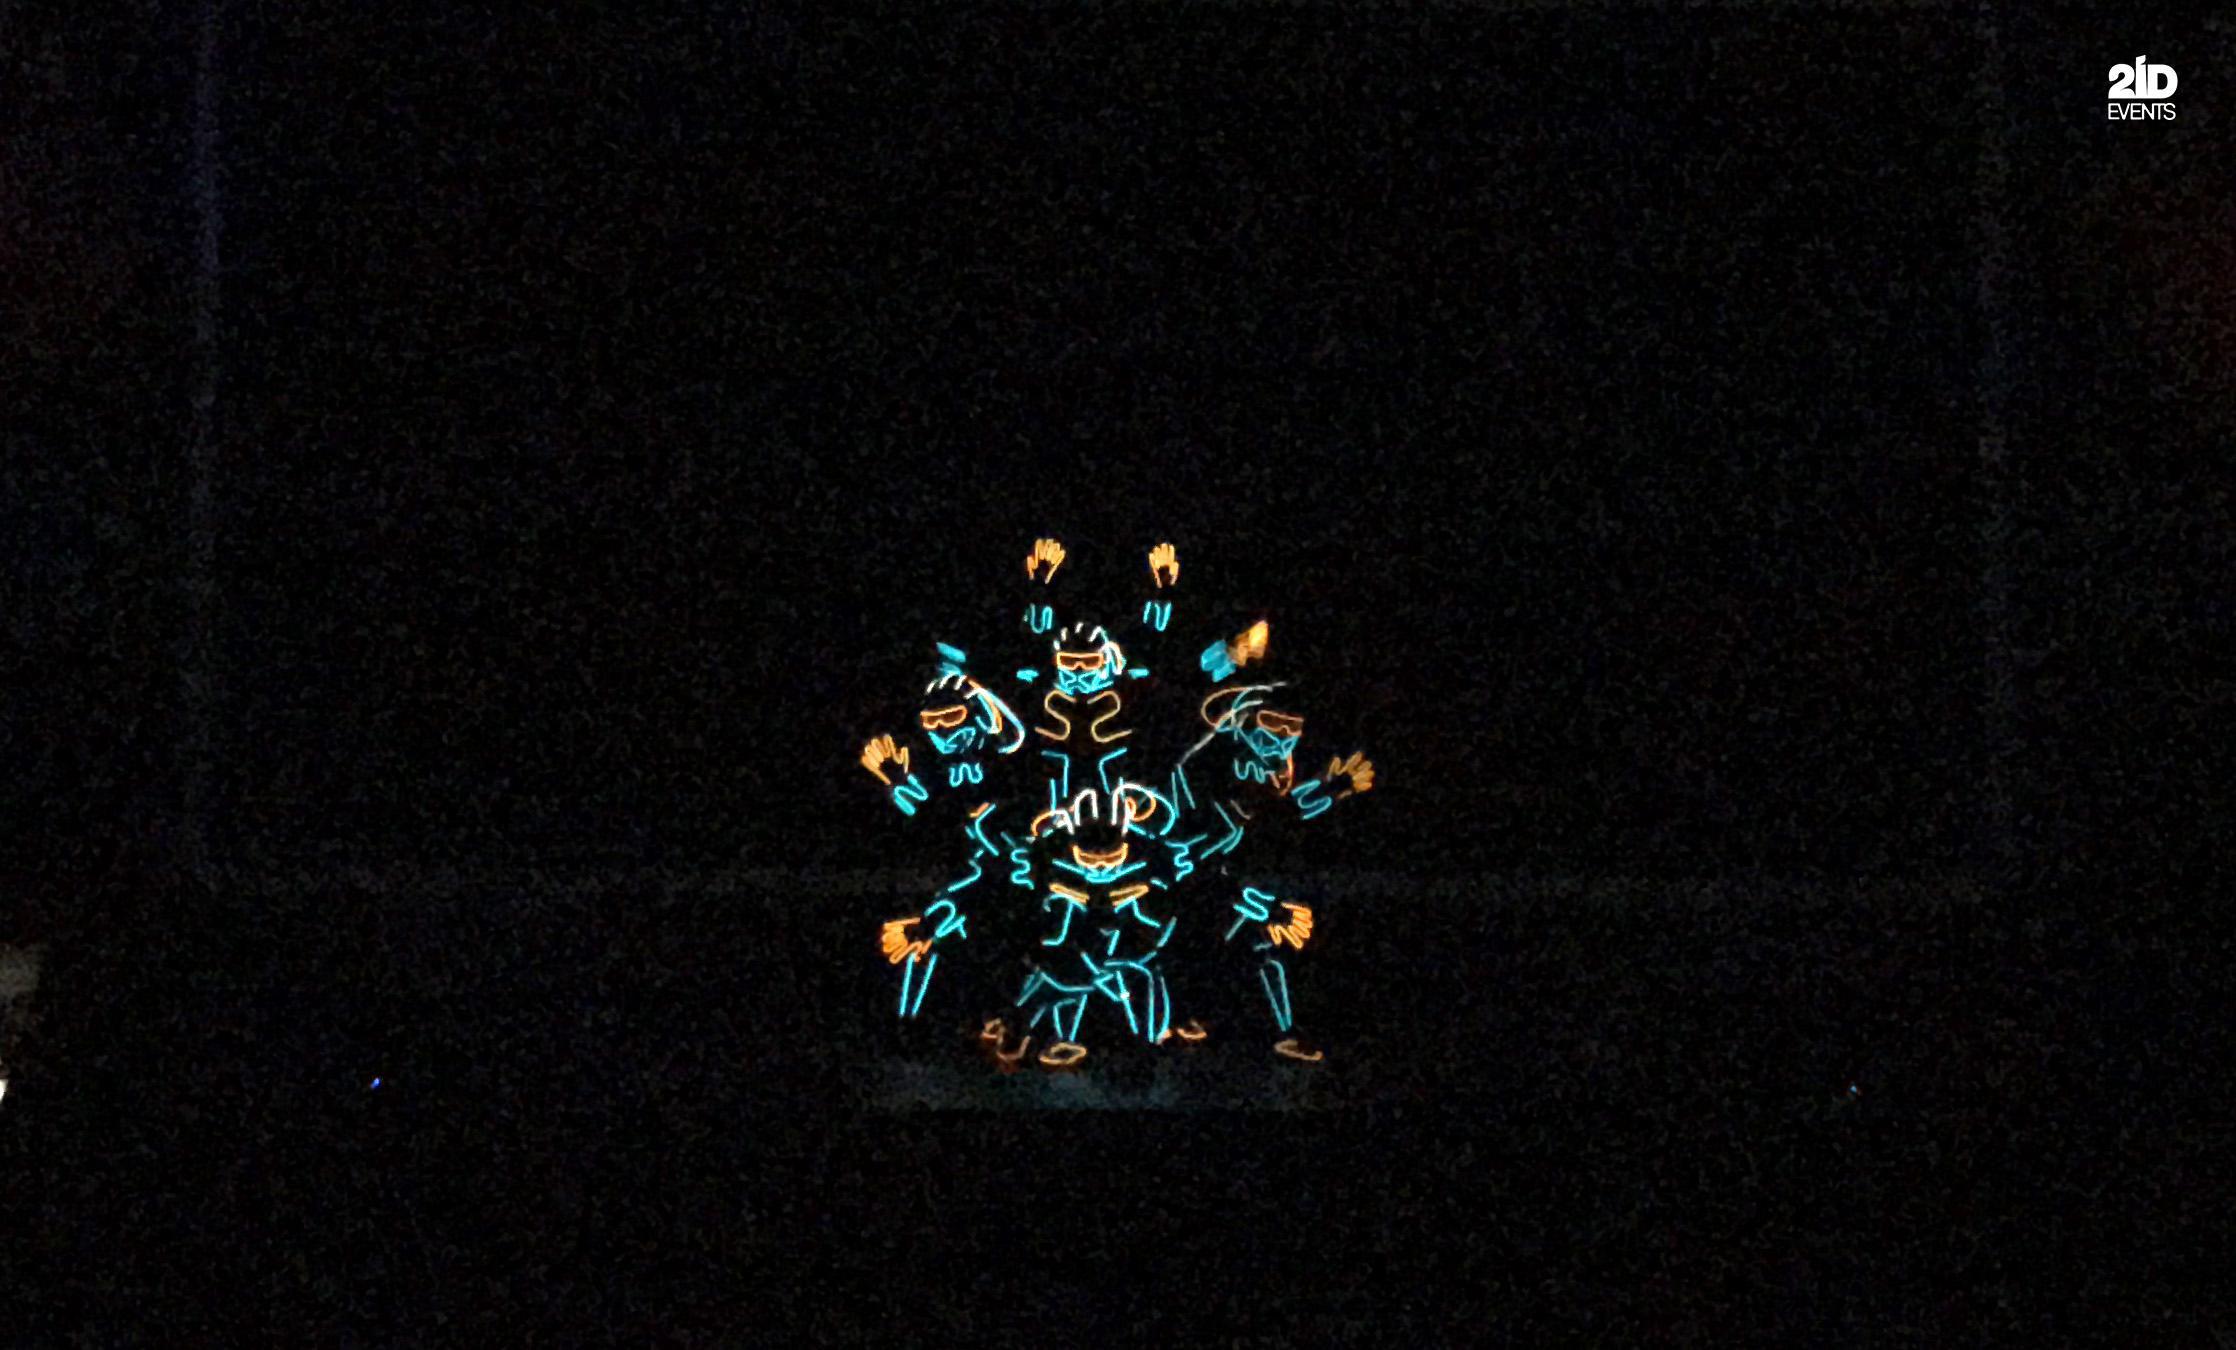 LED ROBOTS SHOW FOR ANNUAL EVENT